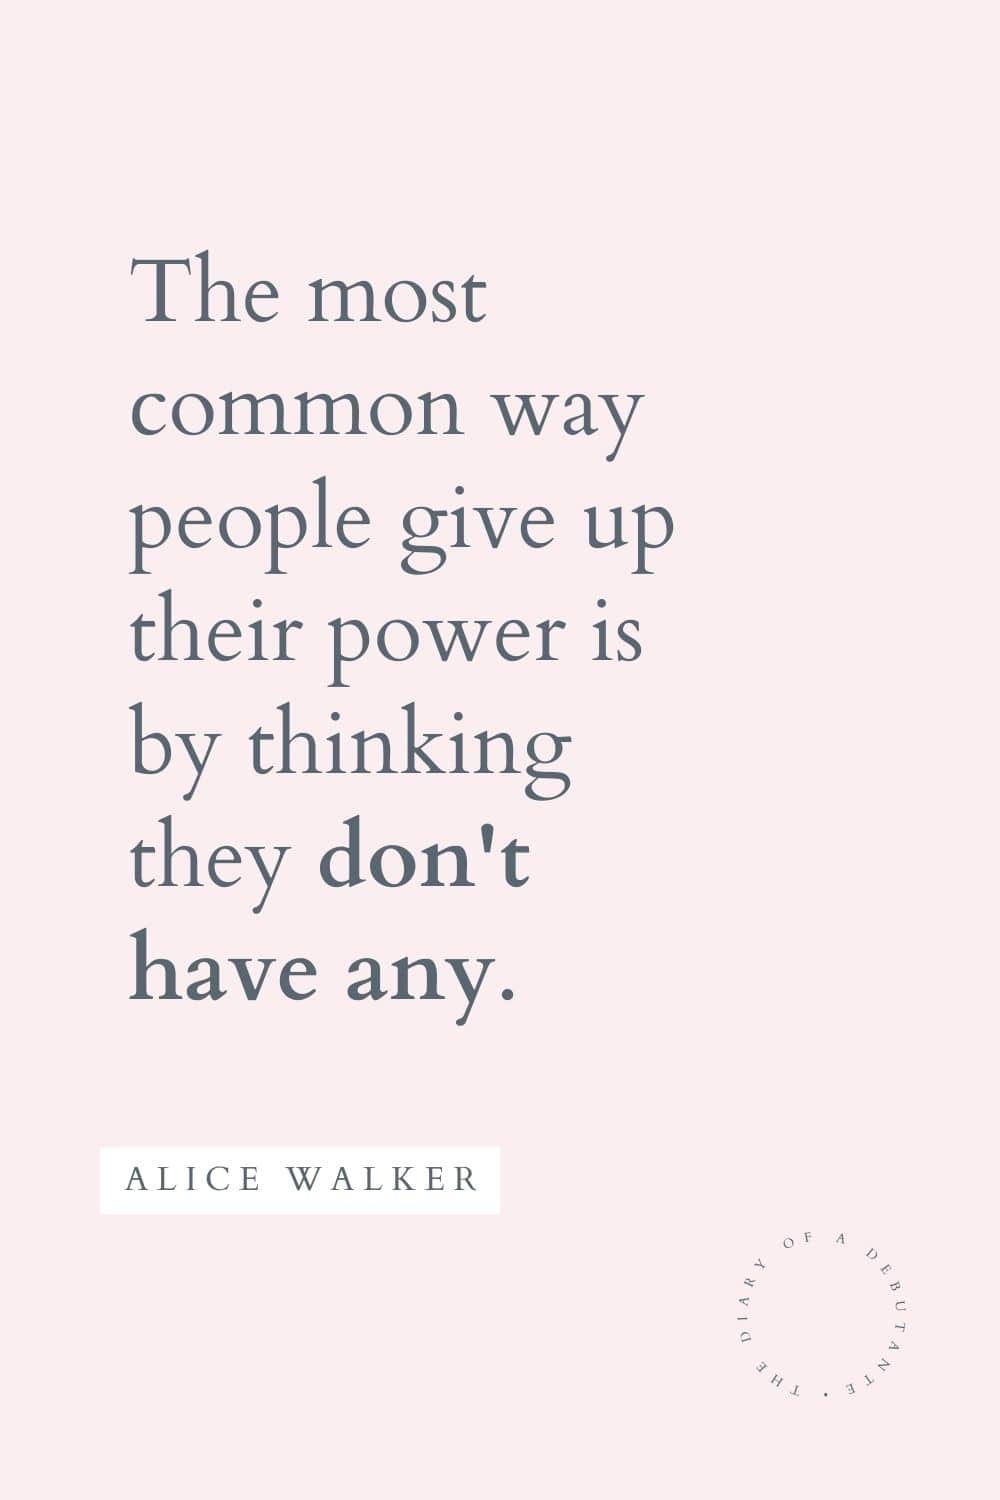 Alice Walker quote curated as part of a collection of positive motivational quotes for women by blogger Stephanie Ziajka on Diary of a Debutante